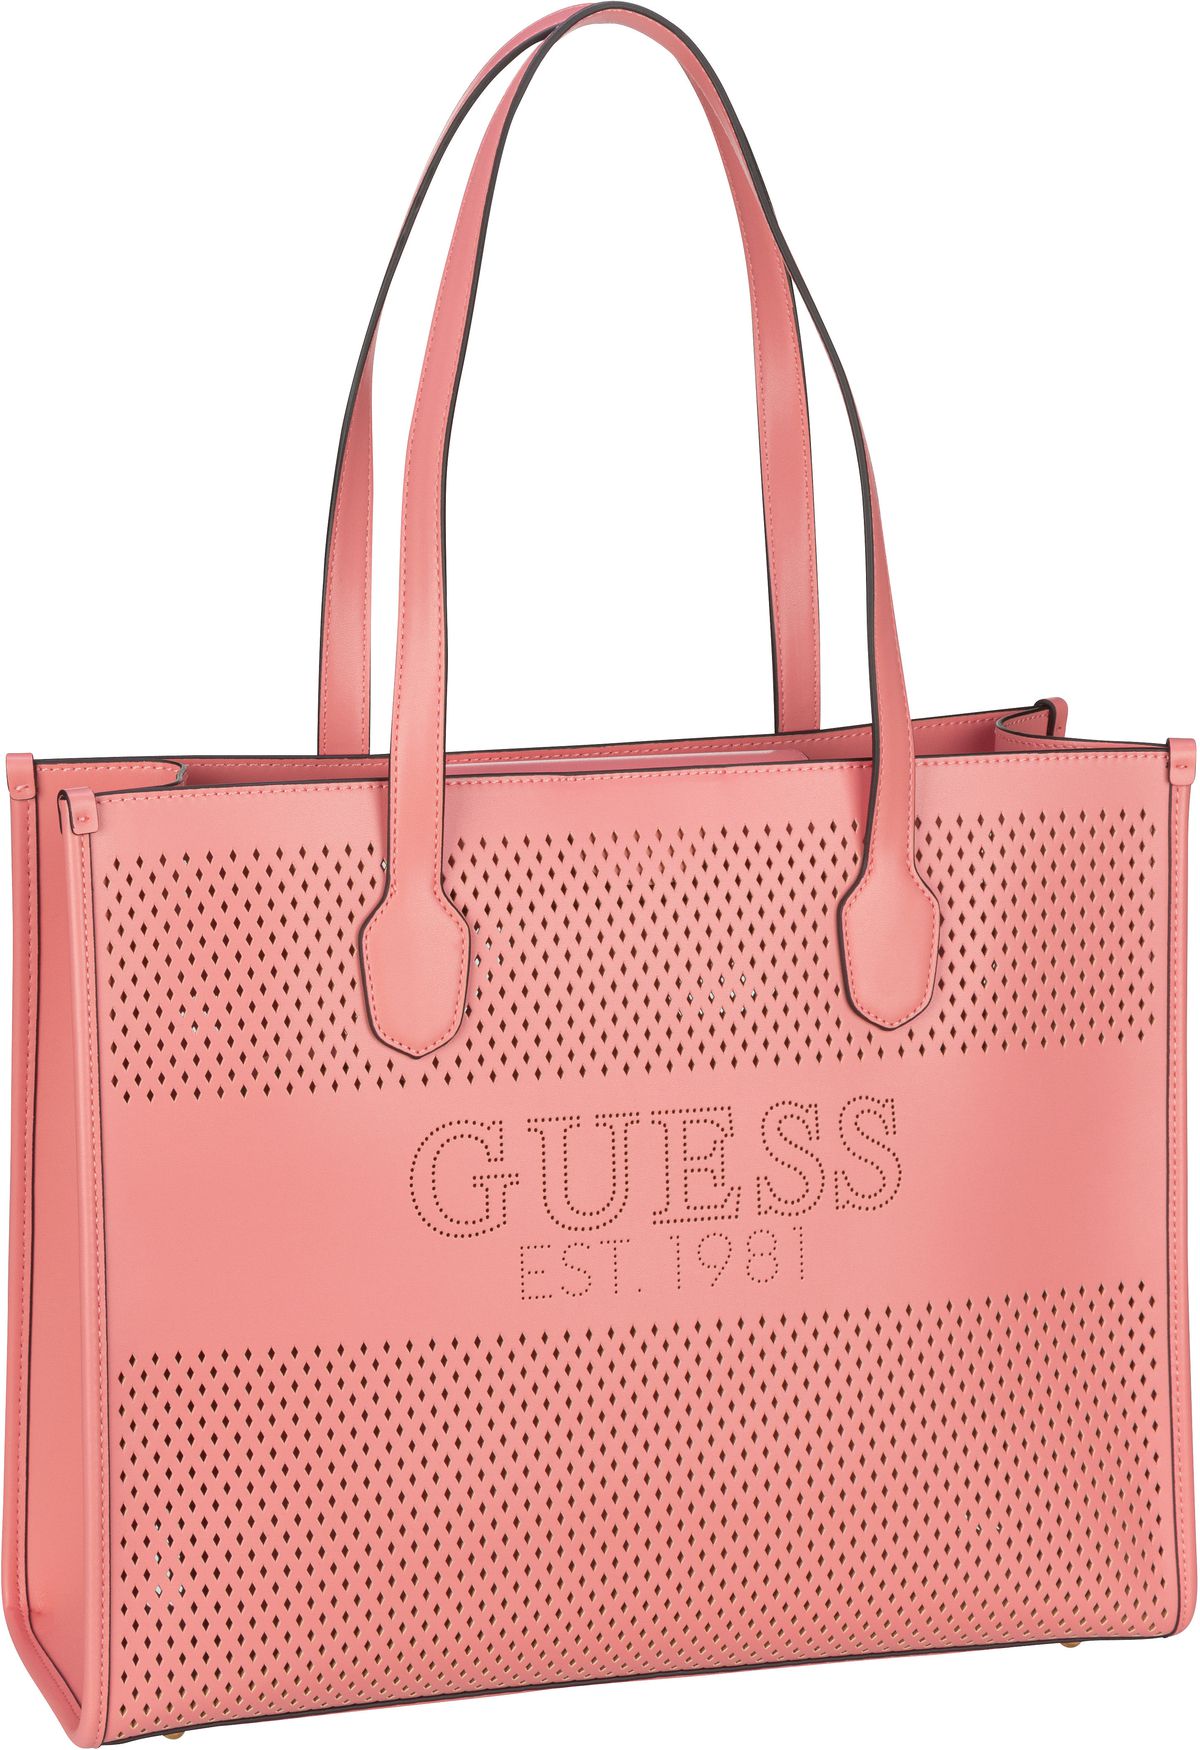 Guess Guess Katey Tote WH in Rosé (19.8 Liter), Shopper